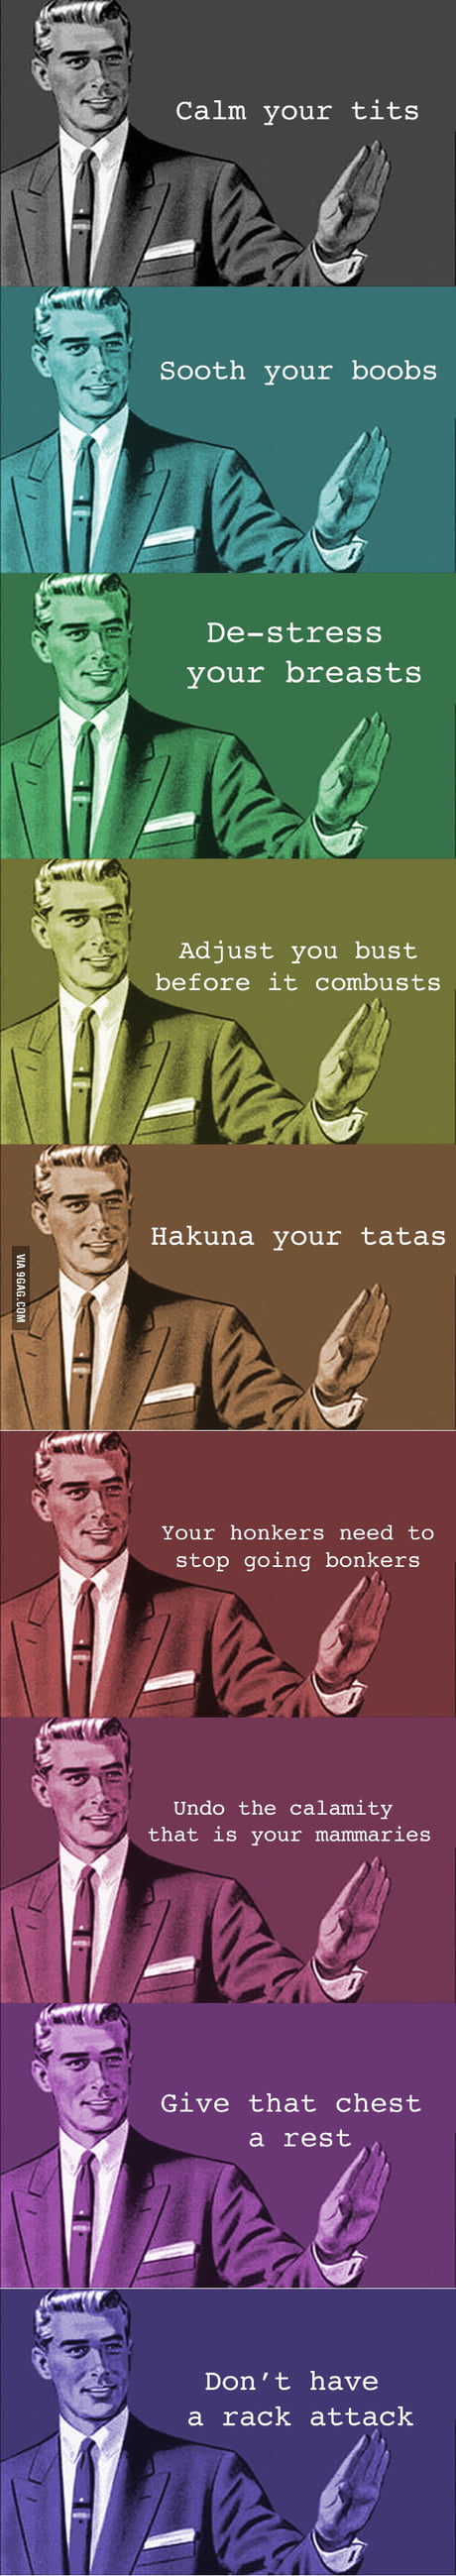 8 Alternative Phrases To “Calm Your Tits” - 9GAG